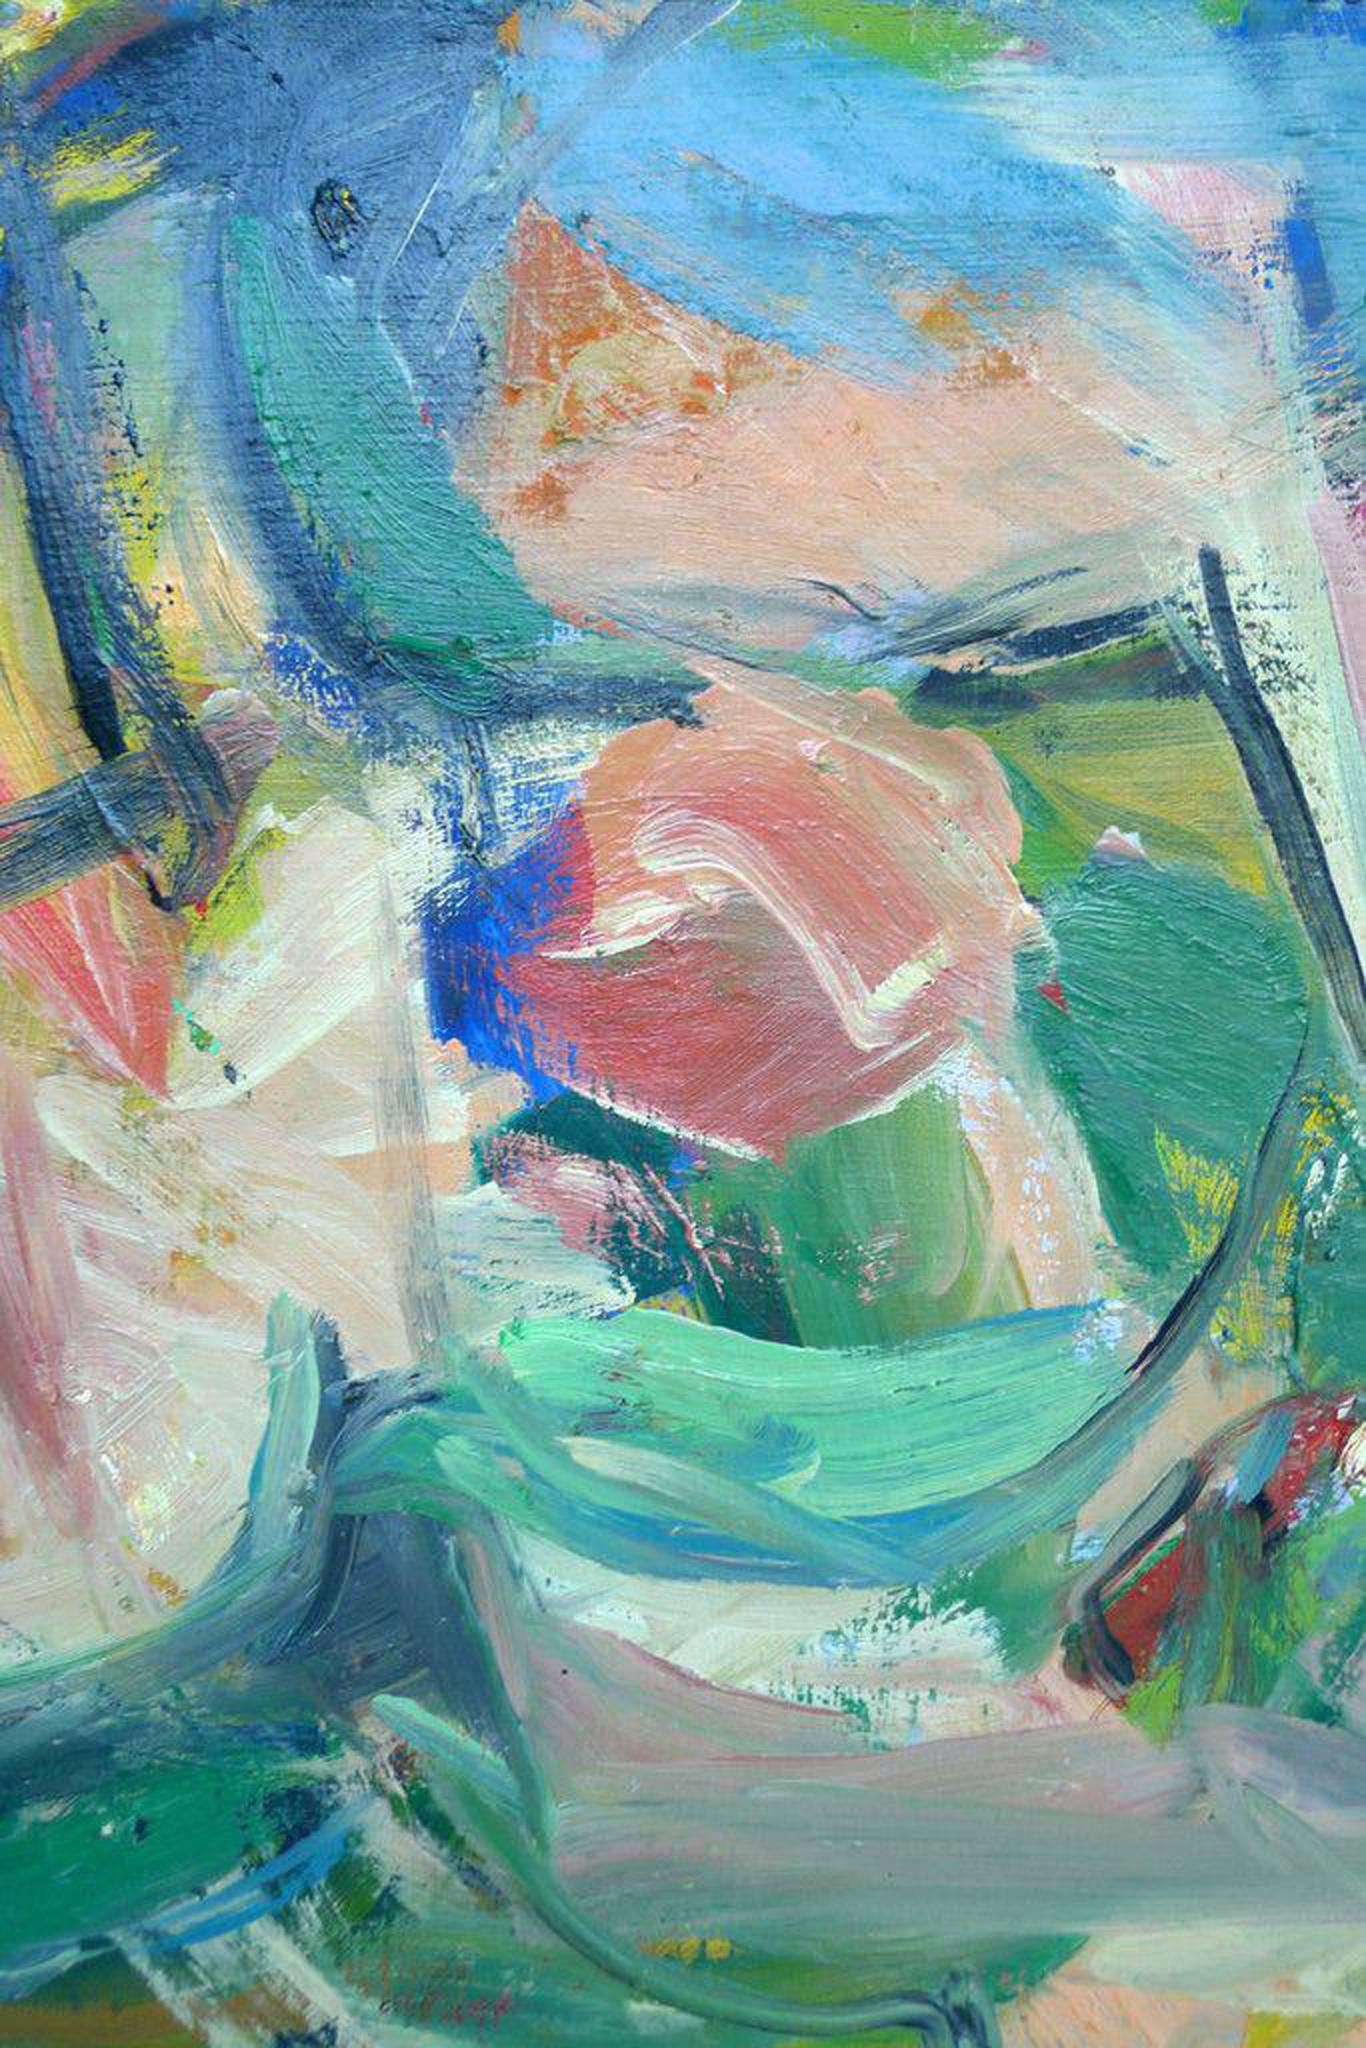 In this horizontal oil painting, something between landscape and abstraction, various hues appear to thrash violently against each other yet come together in one picture. Emily Farnham was an artist, writer, and professor. She studied with painter